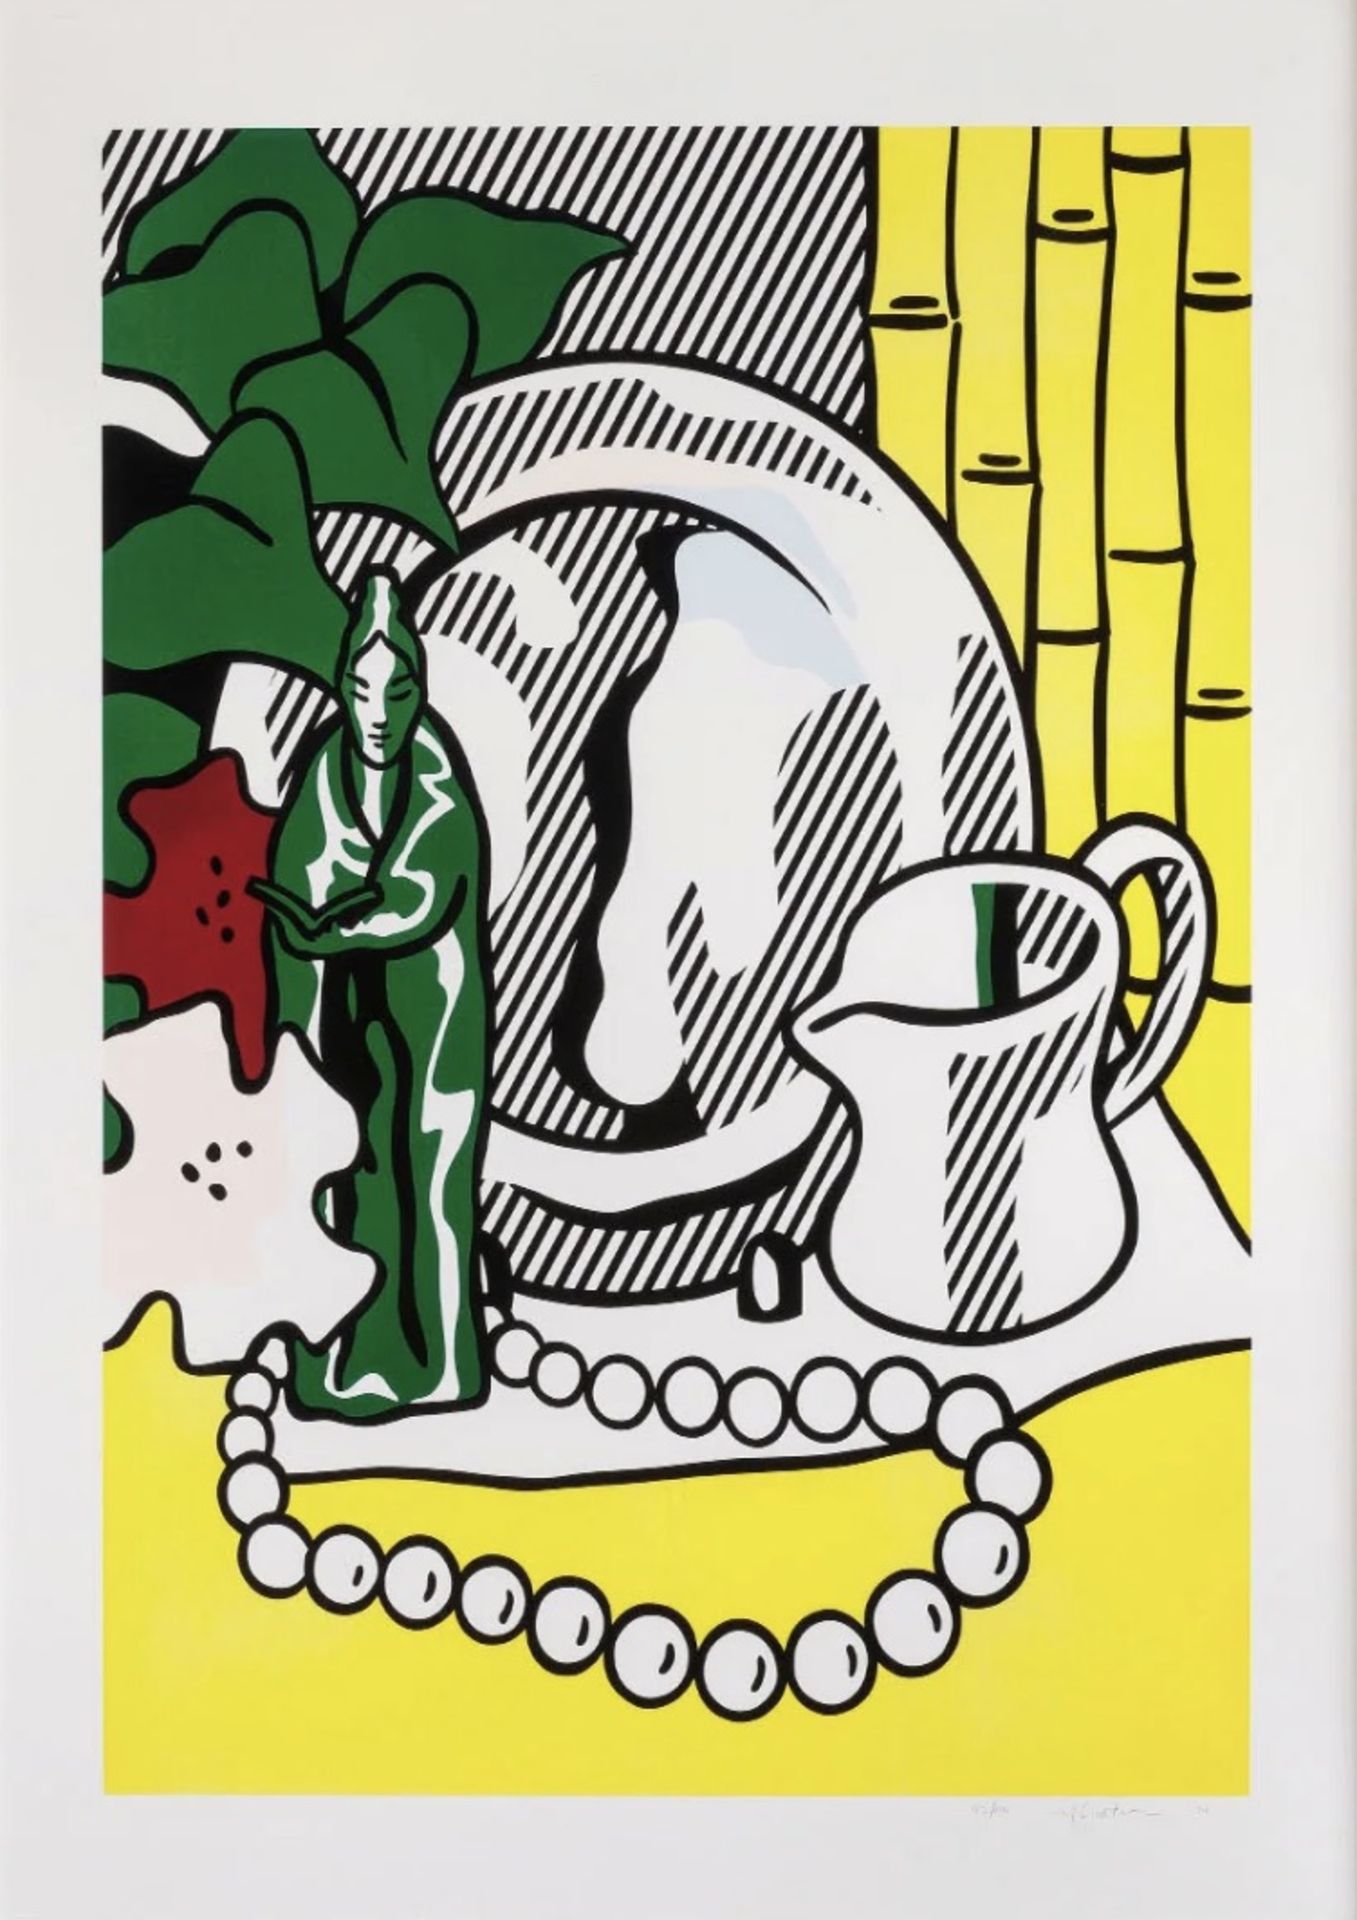 Roy Lichtenstein "Untitled" Plate Signed Offset Lithograph